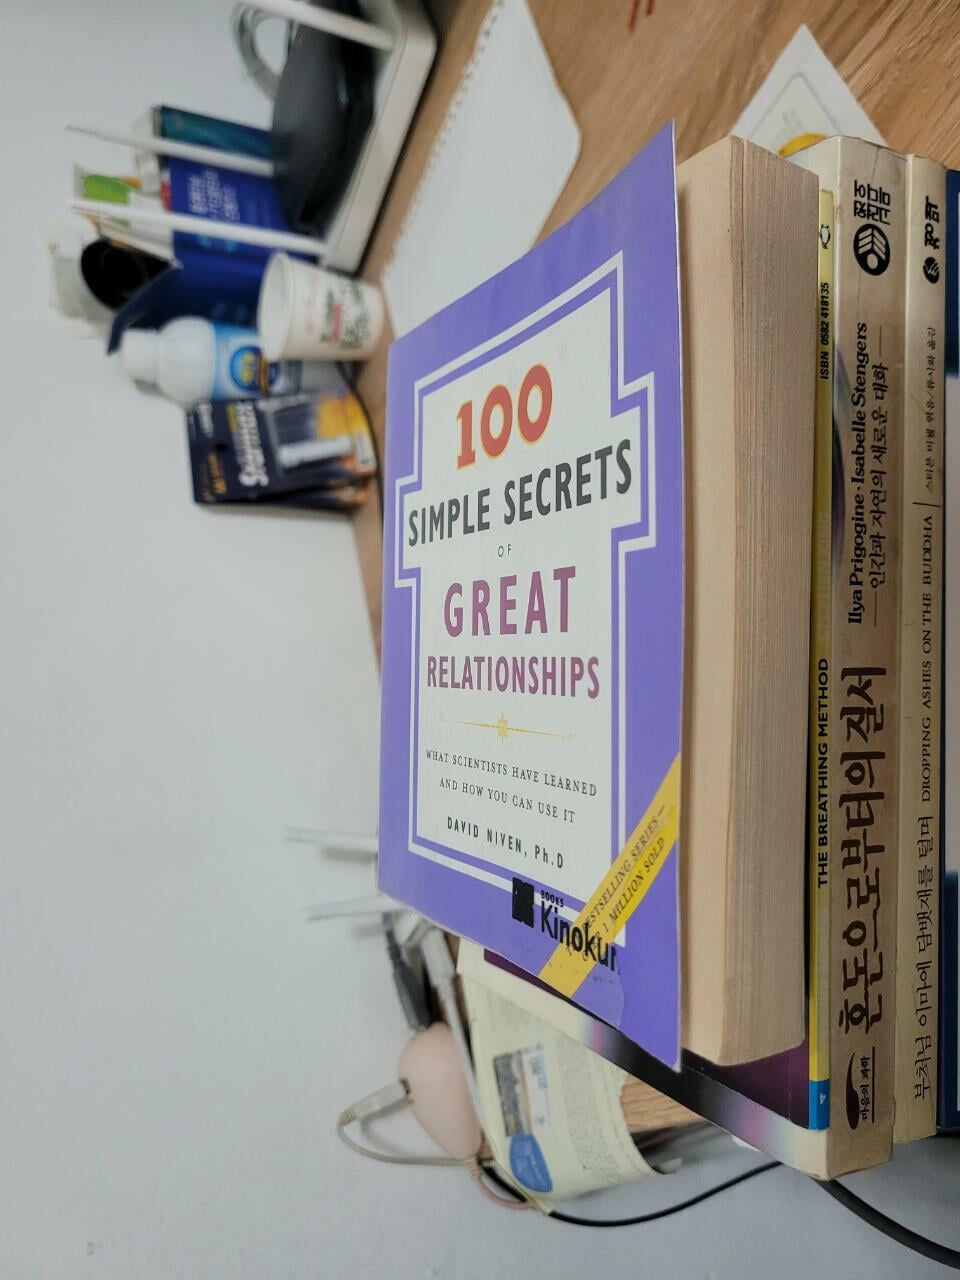 100 Simple Secrets of Great Relationships: What Scientists Have Learned and How You Can Use It